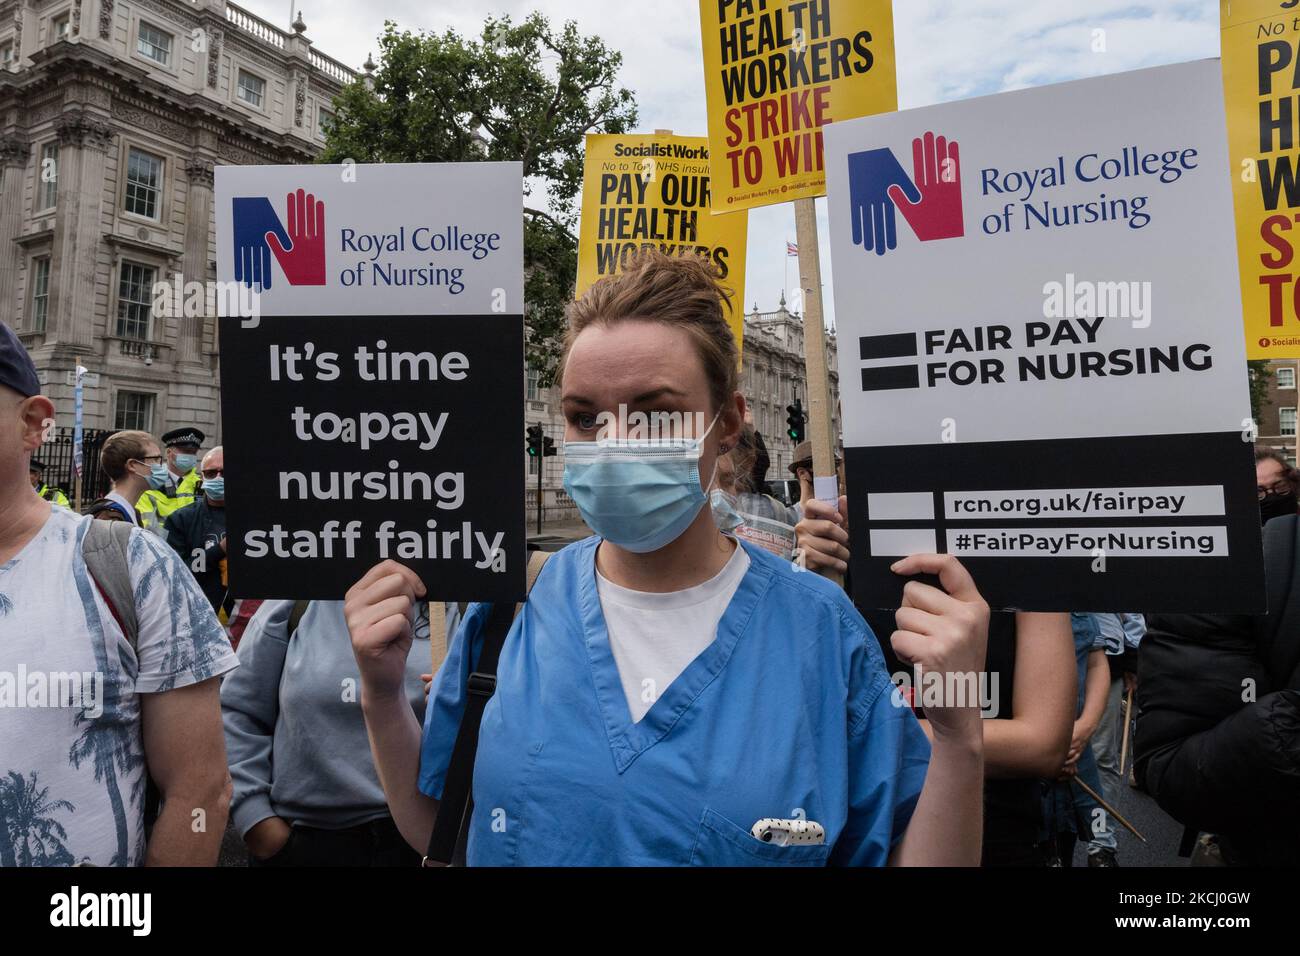 LONDON, UNITED KINGDOM - JULY 30, 2021: NHS staff and their supporters gather outside Downing Street during a protest demanding a fair pay increase for health workers on July 30, 2021 in London, England. The government has announced a 3% pay rise for the NHS staff in England and Wales following NHS Pay Review Body’s recommendations, however the campaigners argue the offer doesn't meet the inflation rate and undervalues healthcare workers who experienced unprecedented pressure during the coronavirus pandemic. (Photo by WIktor Szymanowicz/NurPhoto) Stock Photo